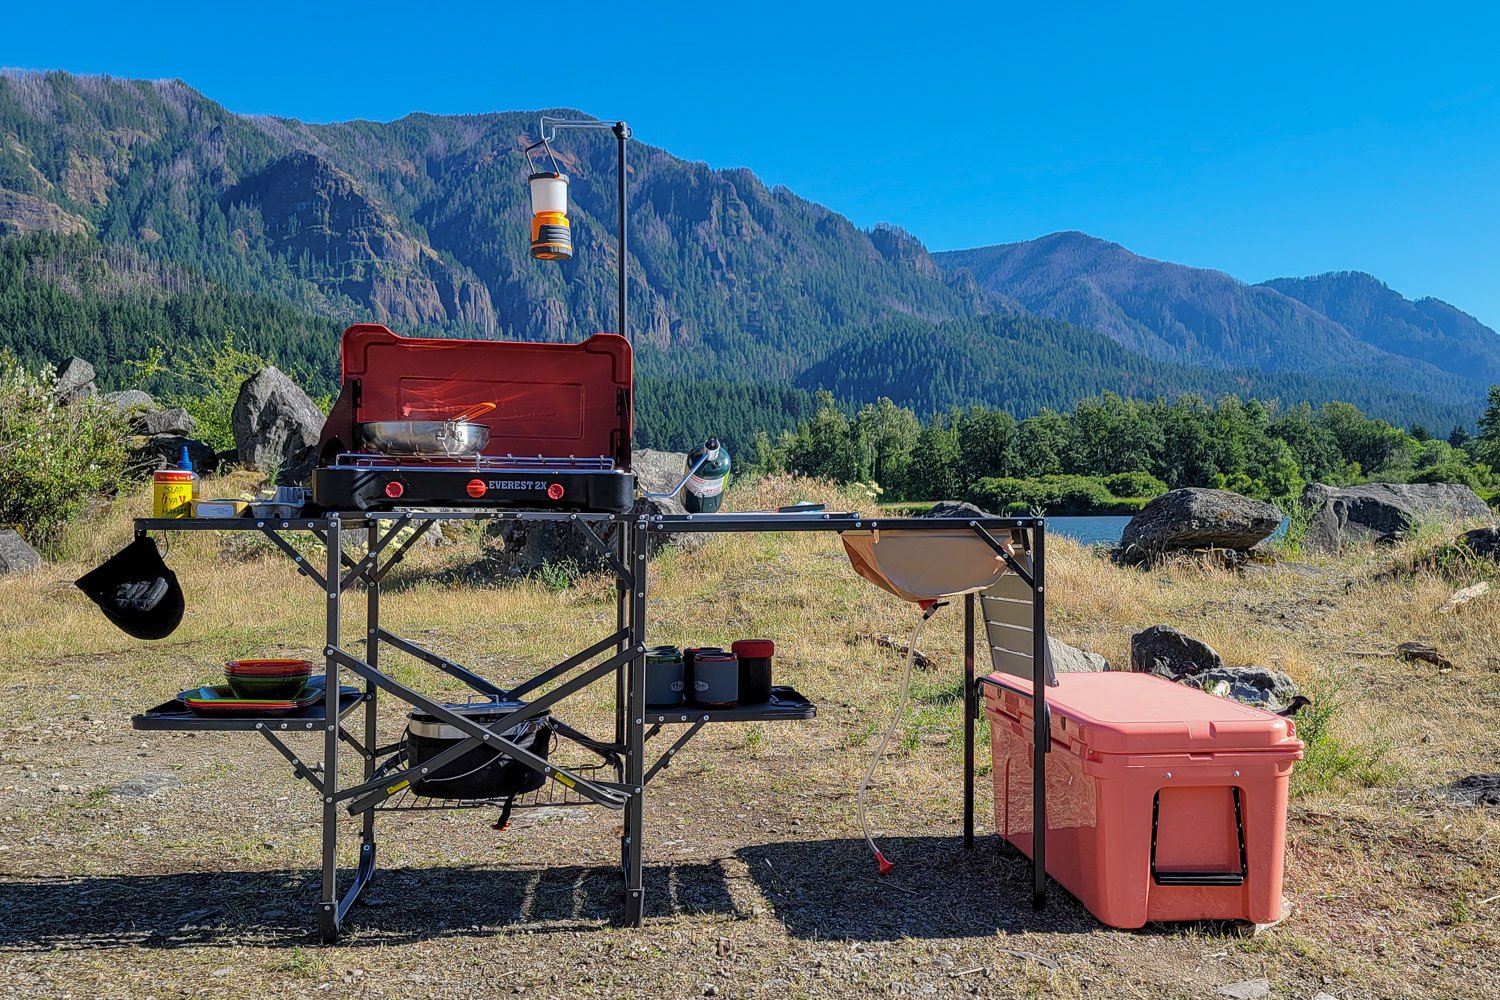 The 10 Best Camping Storage and Organizers for Travel [2023]